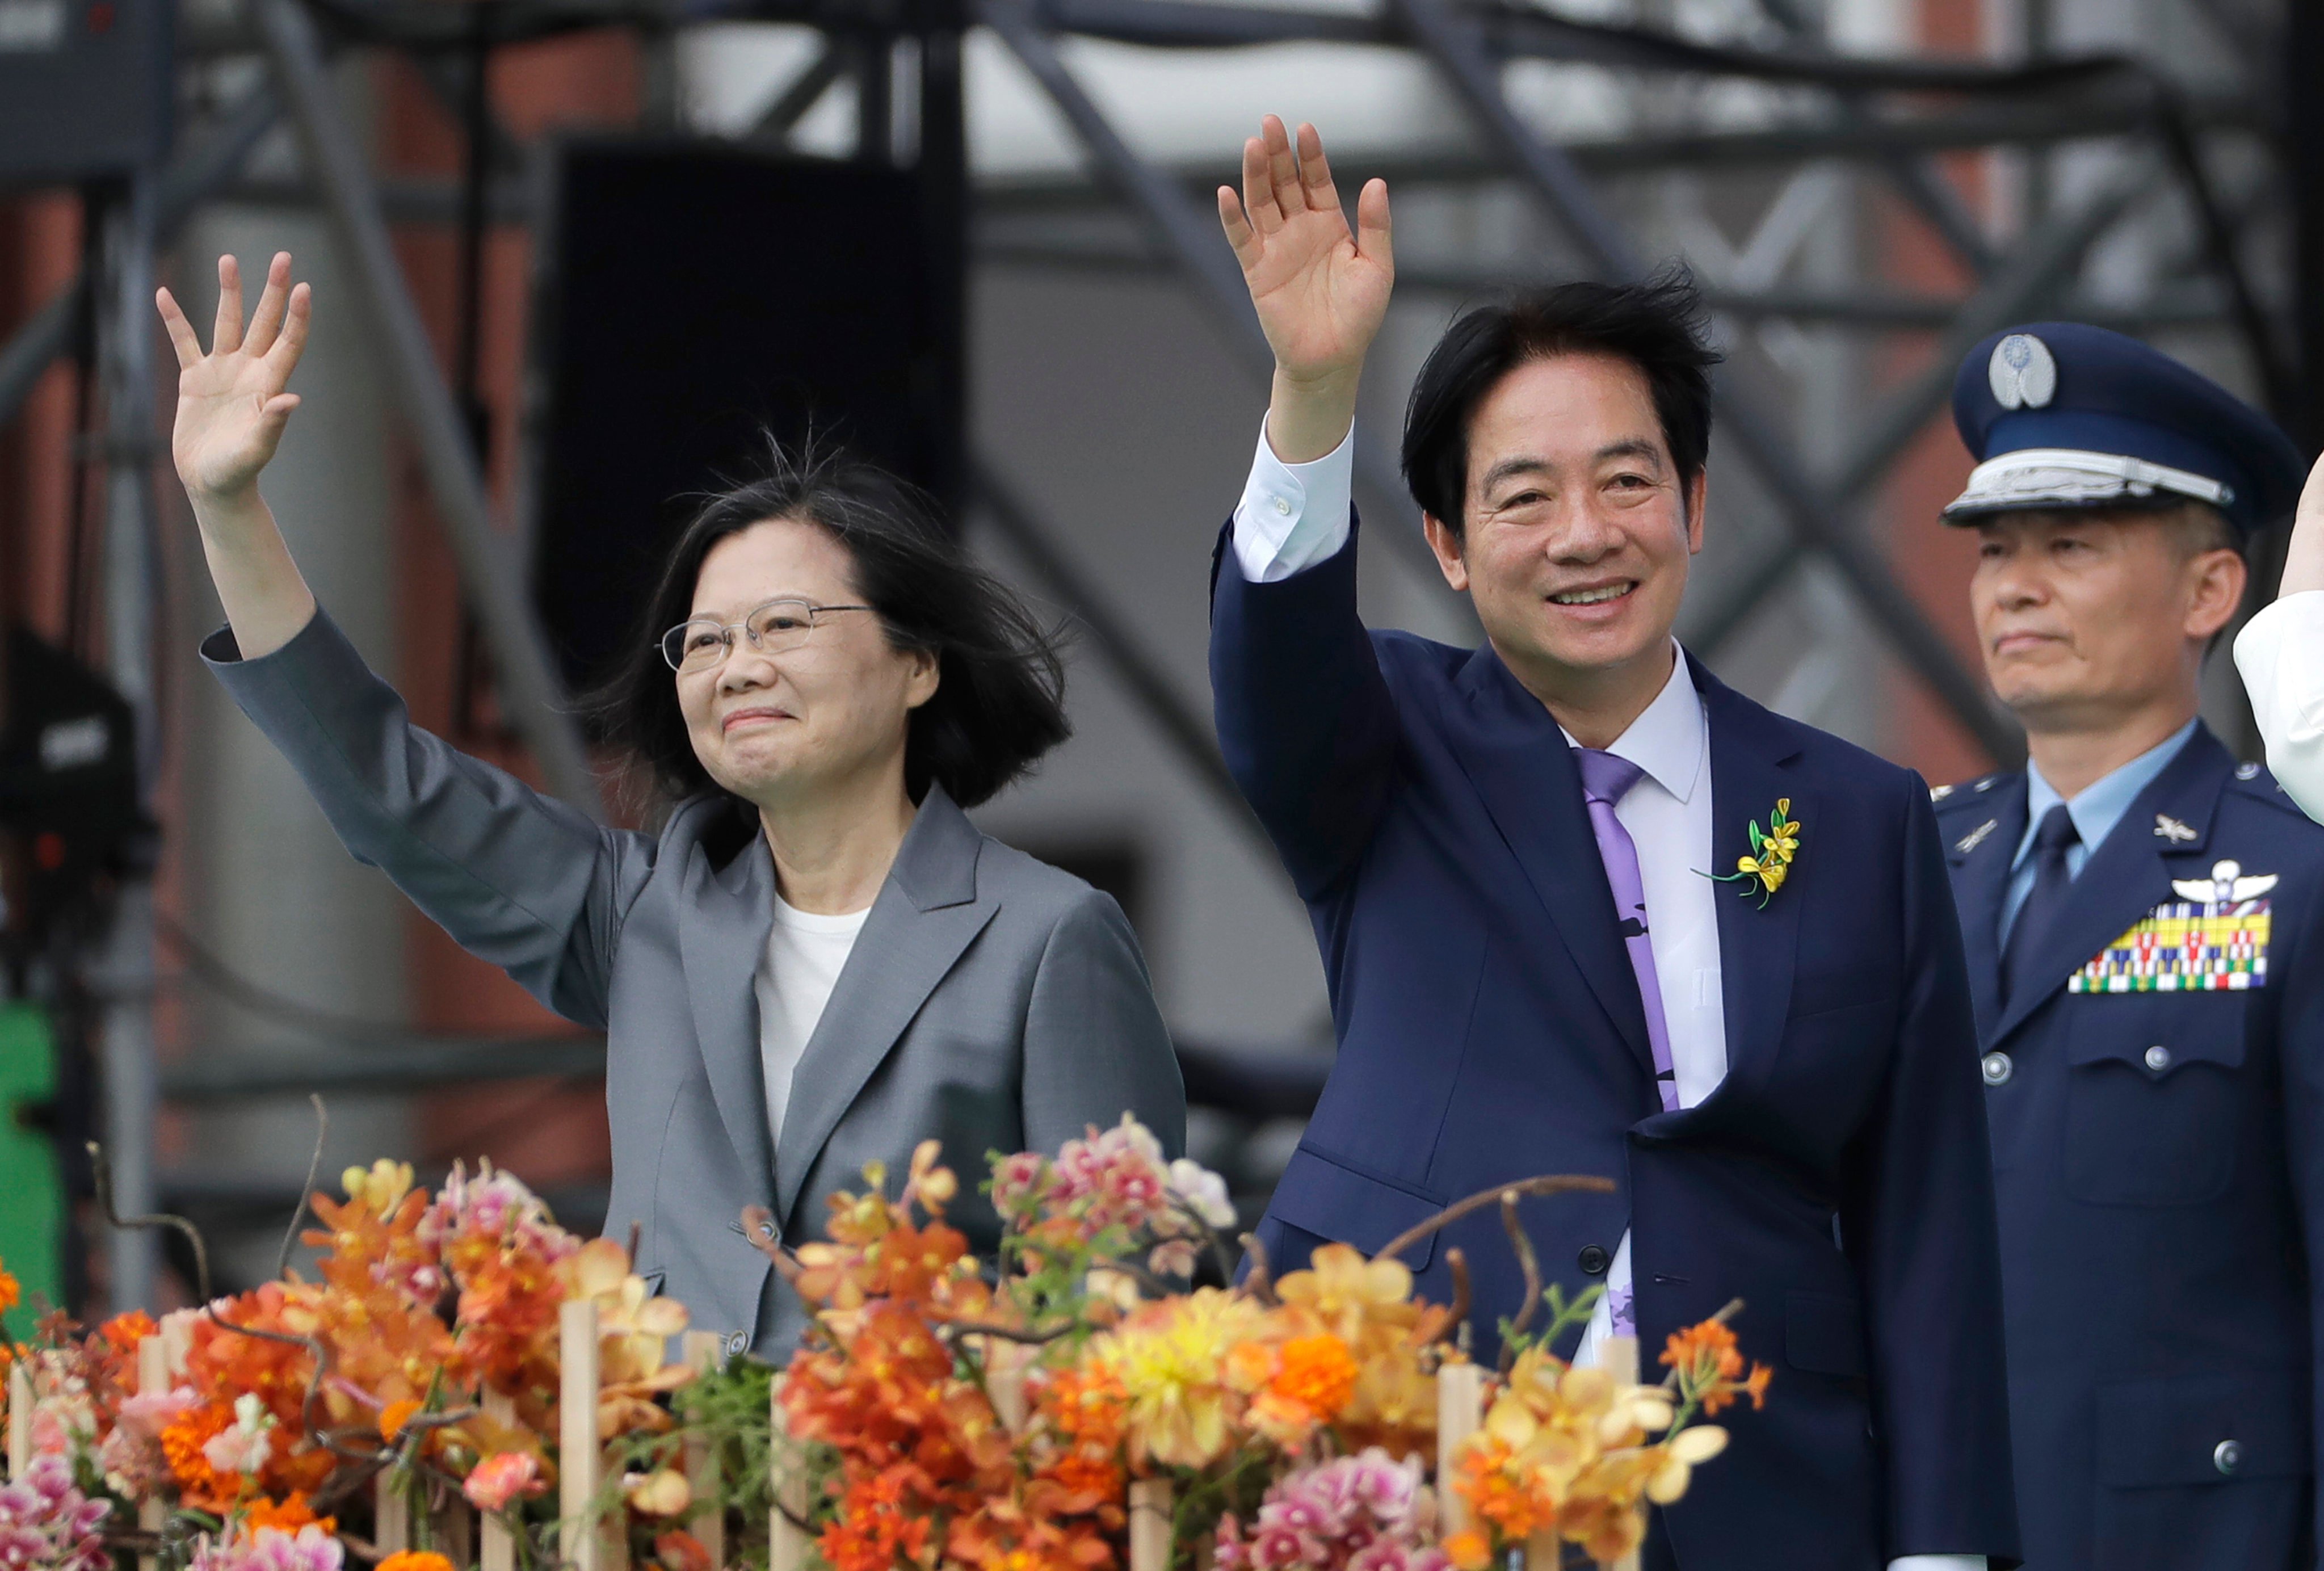 Taiwan’s new leader William Lai (right) and former president Tsai Ing-wen wave during the inauguration ceremony in Taipei on Monday. Photo: AP